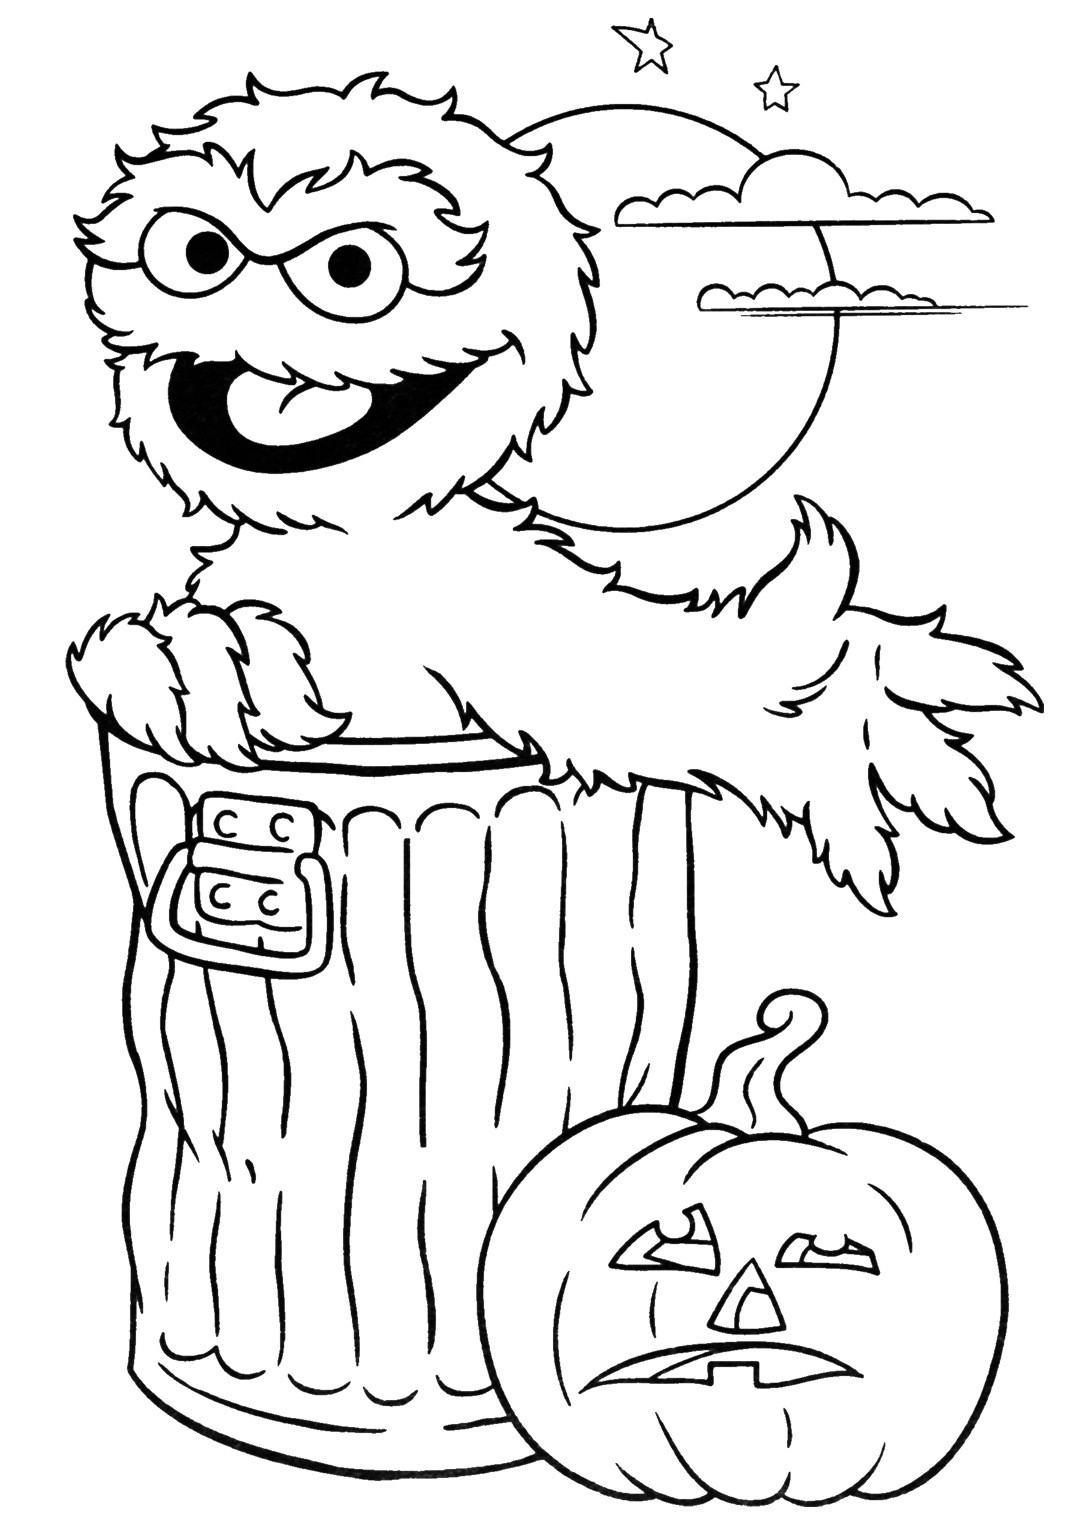 Free Halloween Coloring Pages For Toddlers
 24 Free Halloween Coloring Pages for Kids Honey Lime